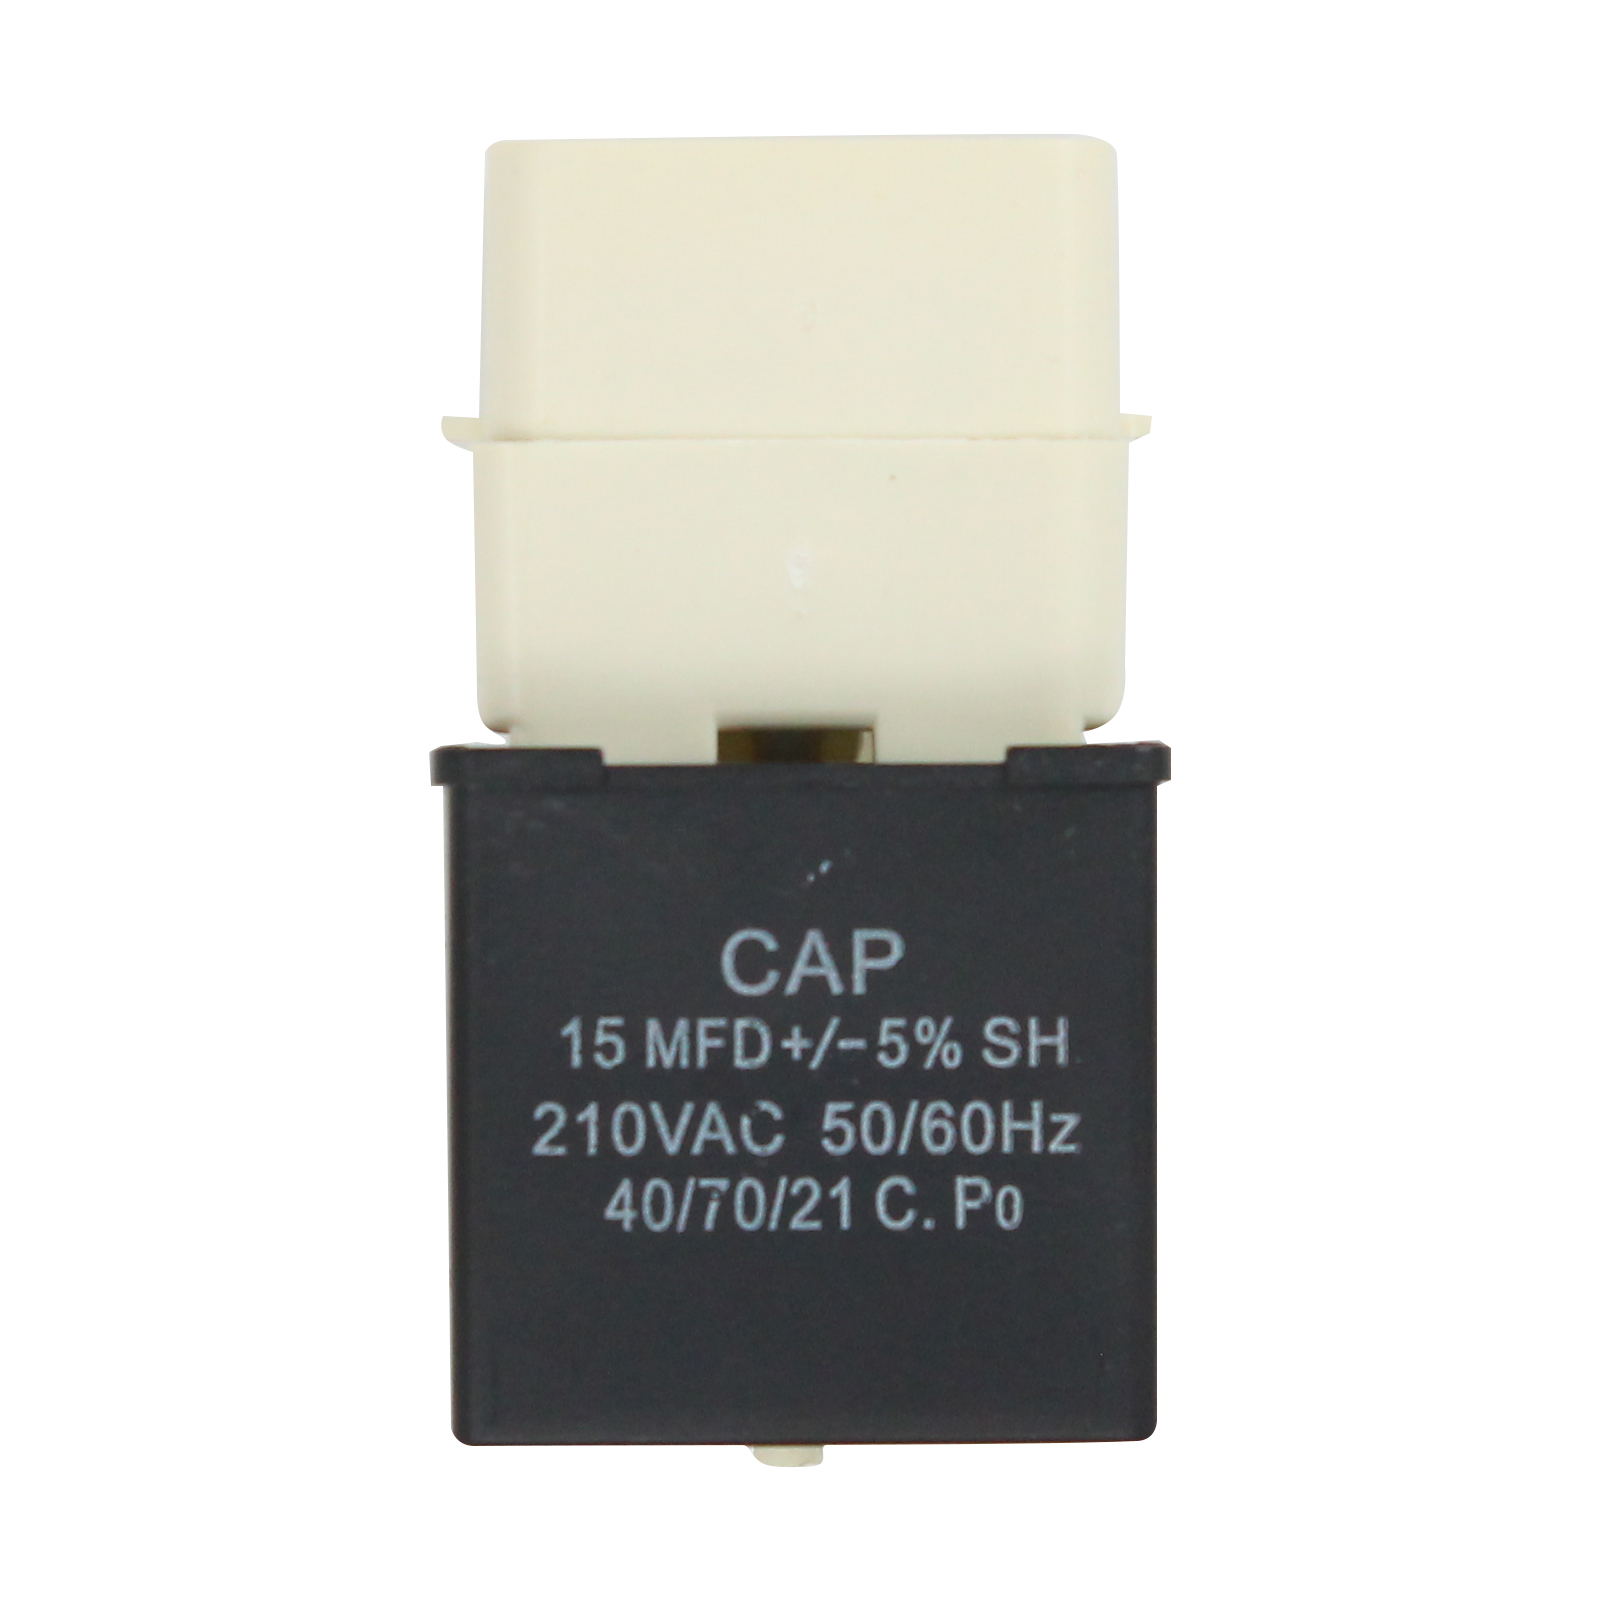 W10613606 Refrigerator Compressor Start Relay & Capacitor Replacement for Maytag MCD2257KES Refrigerator - Compatible with W10613606 Start Device Relay Overload With Capacitor - image 2 of 4